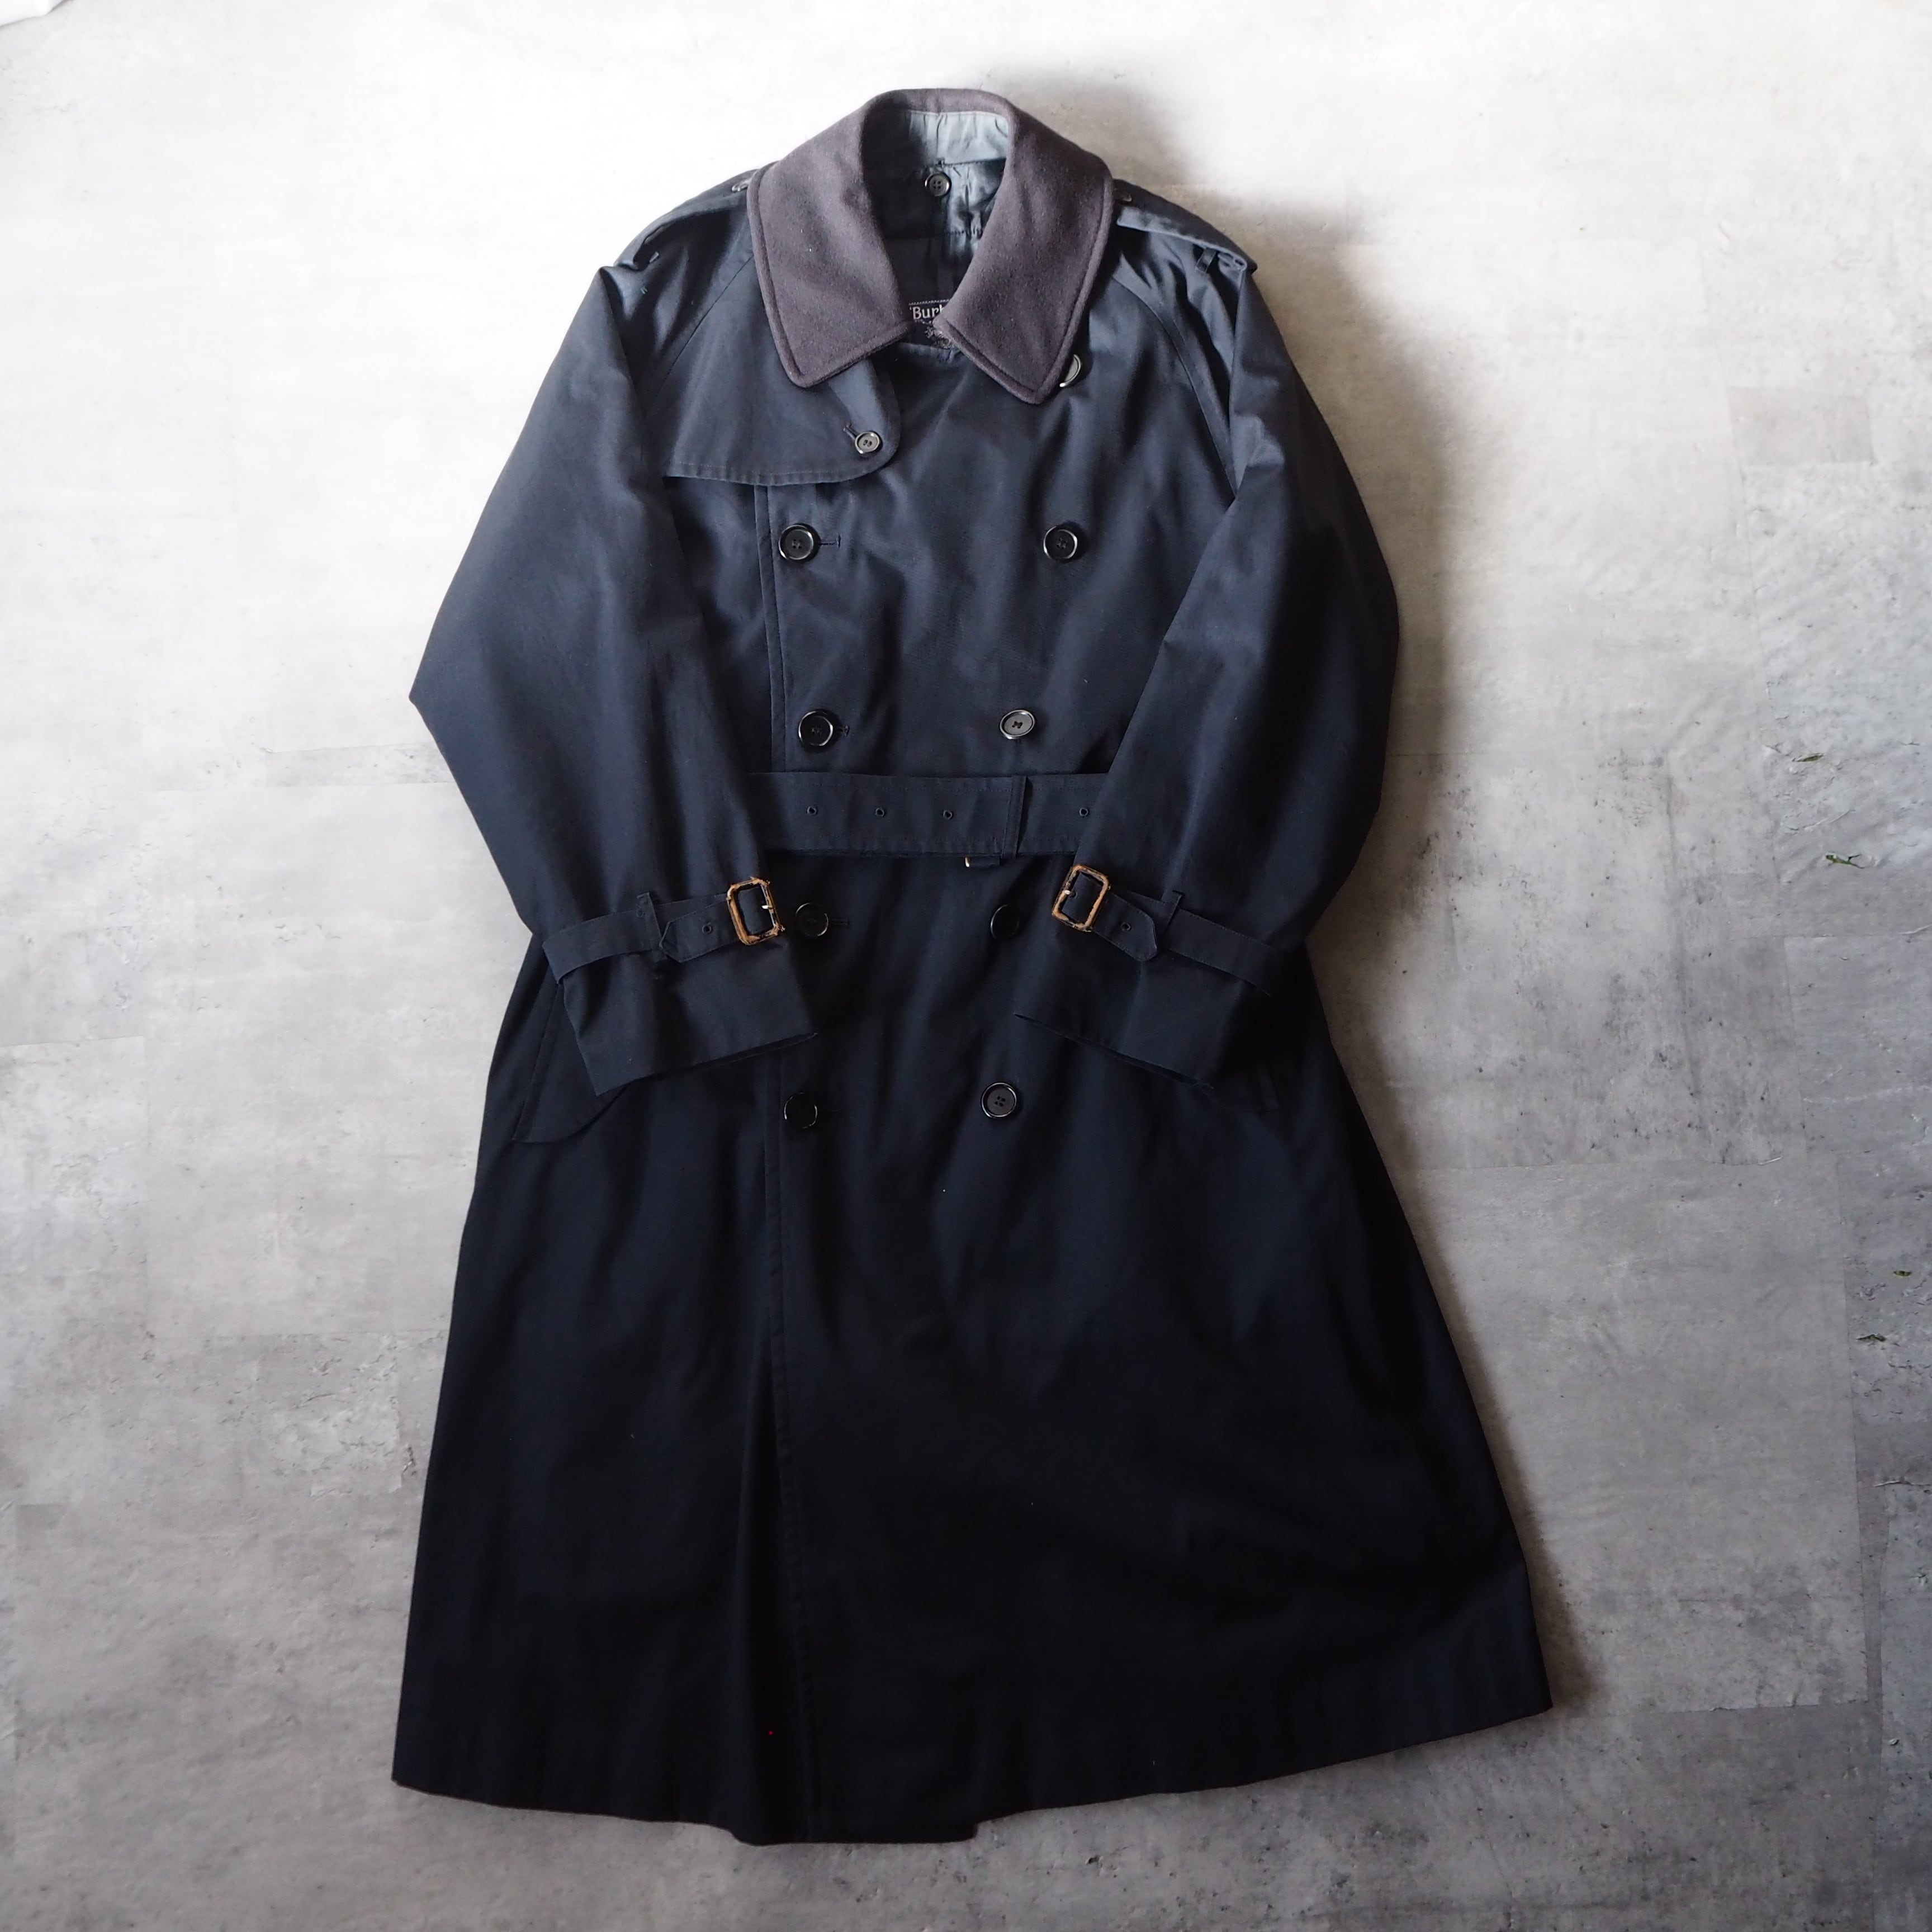 80s “Burberrys” 一枚袖 trench coat with liner navy color made in England バーバリー  トレンチコート 1枚袖 英国製 ヴィンテージ vintage